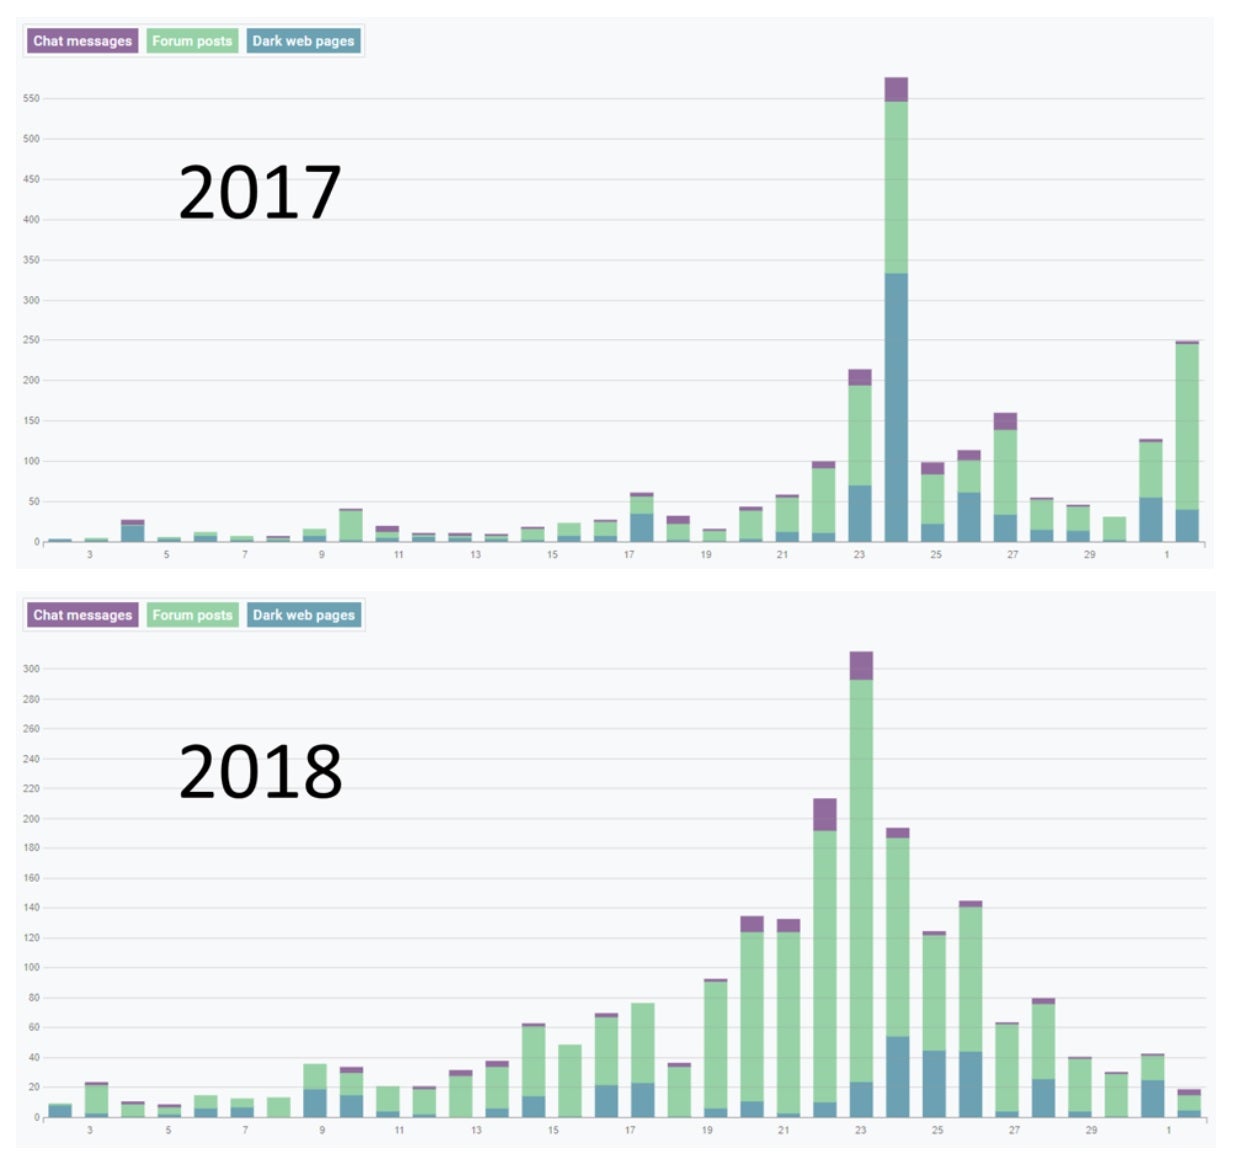 Black Friday mentions across the dark web in 2017 and 2018